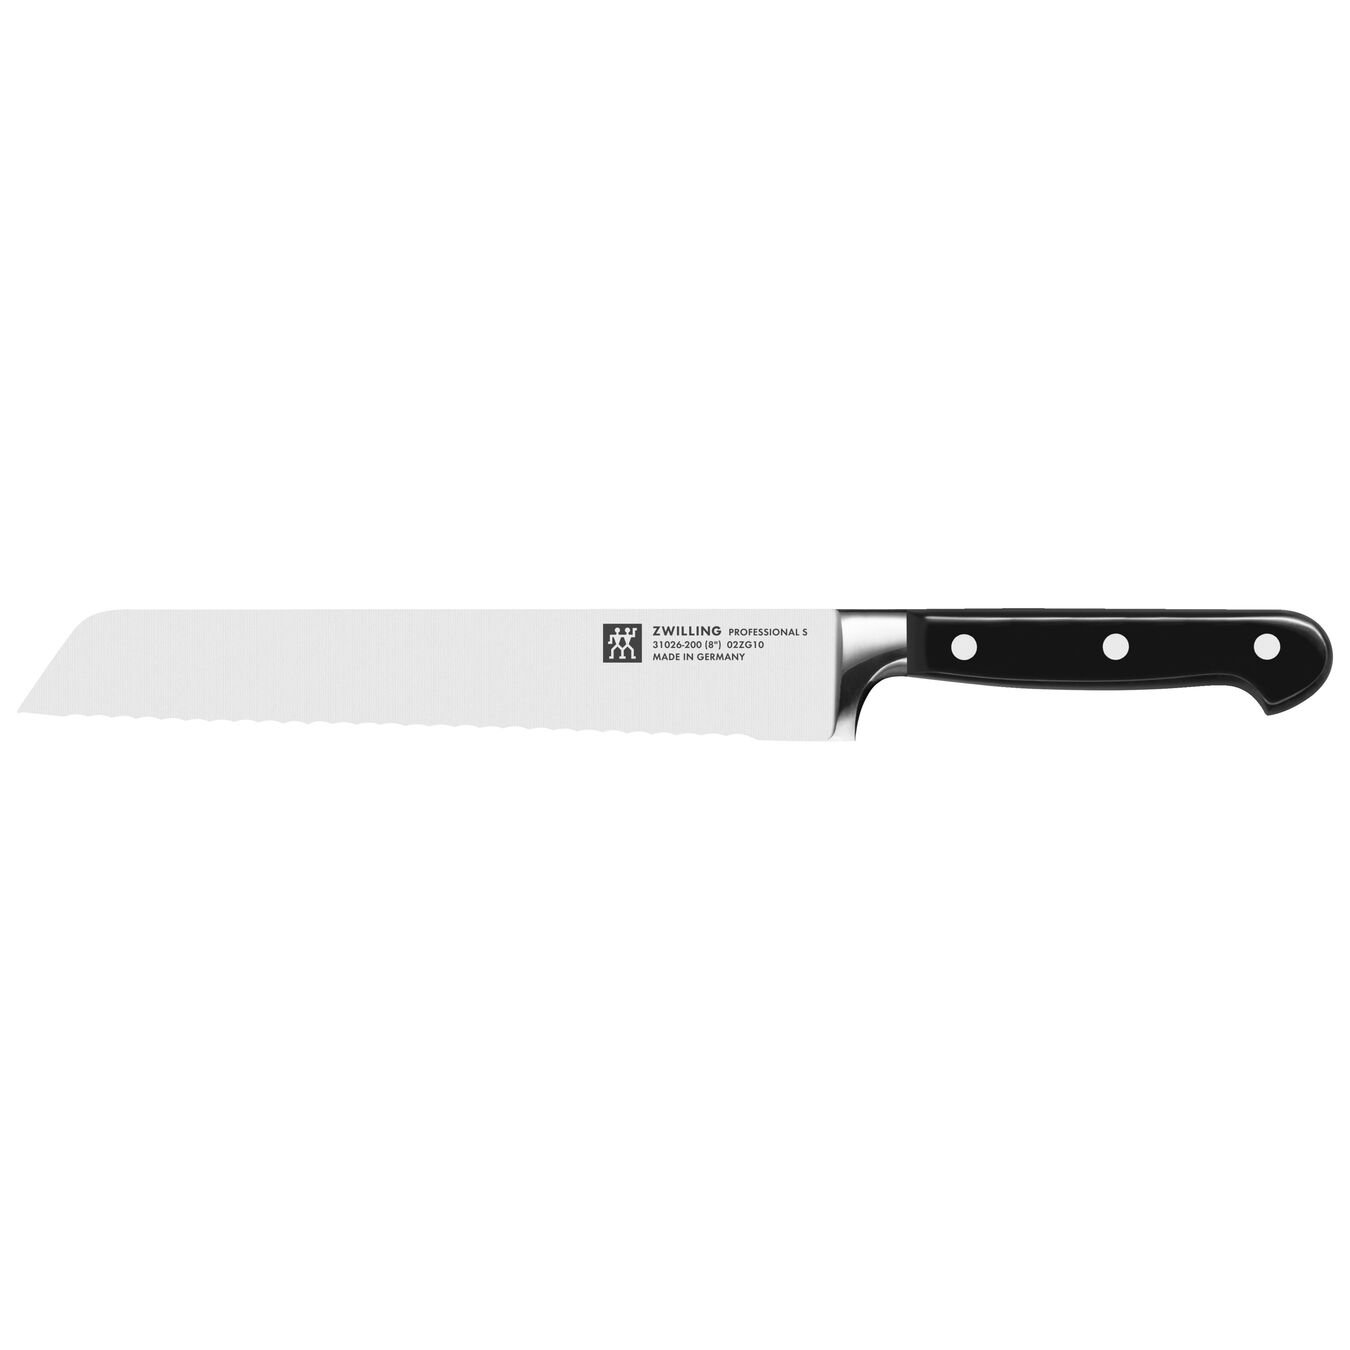 8-inch, Bread knife - Visual Imperfections,,large 1